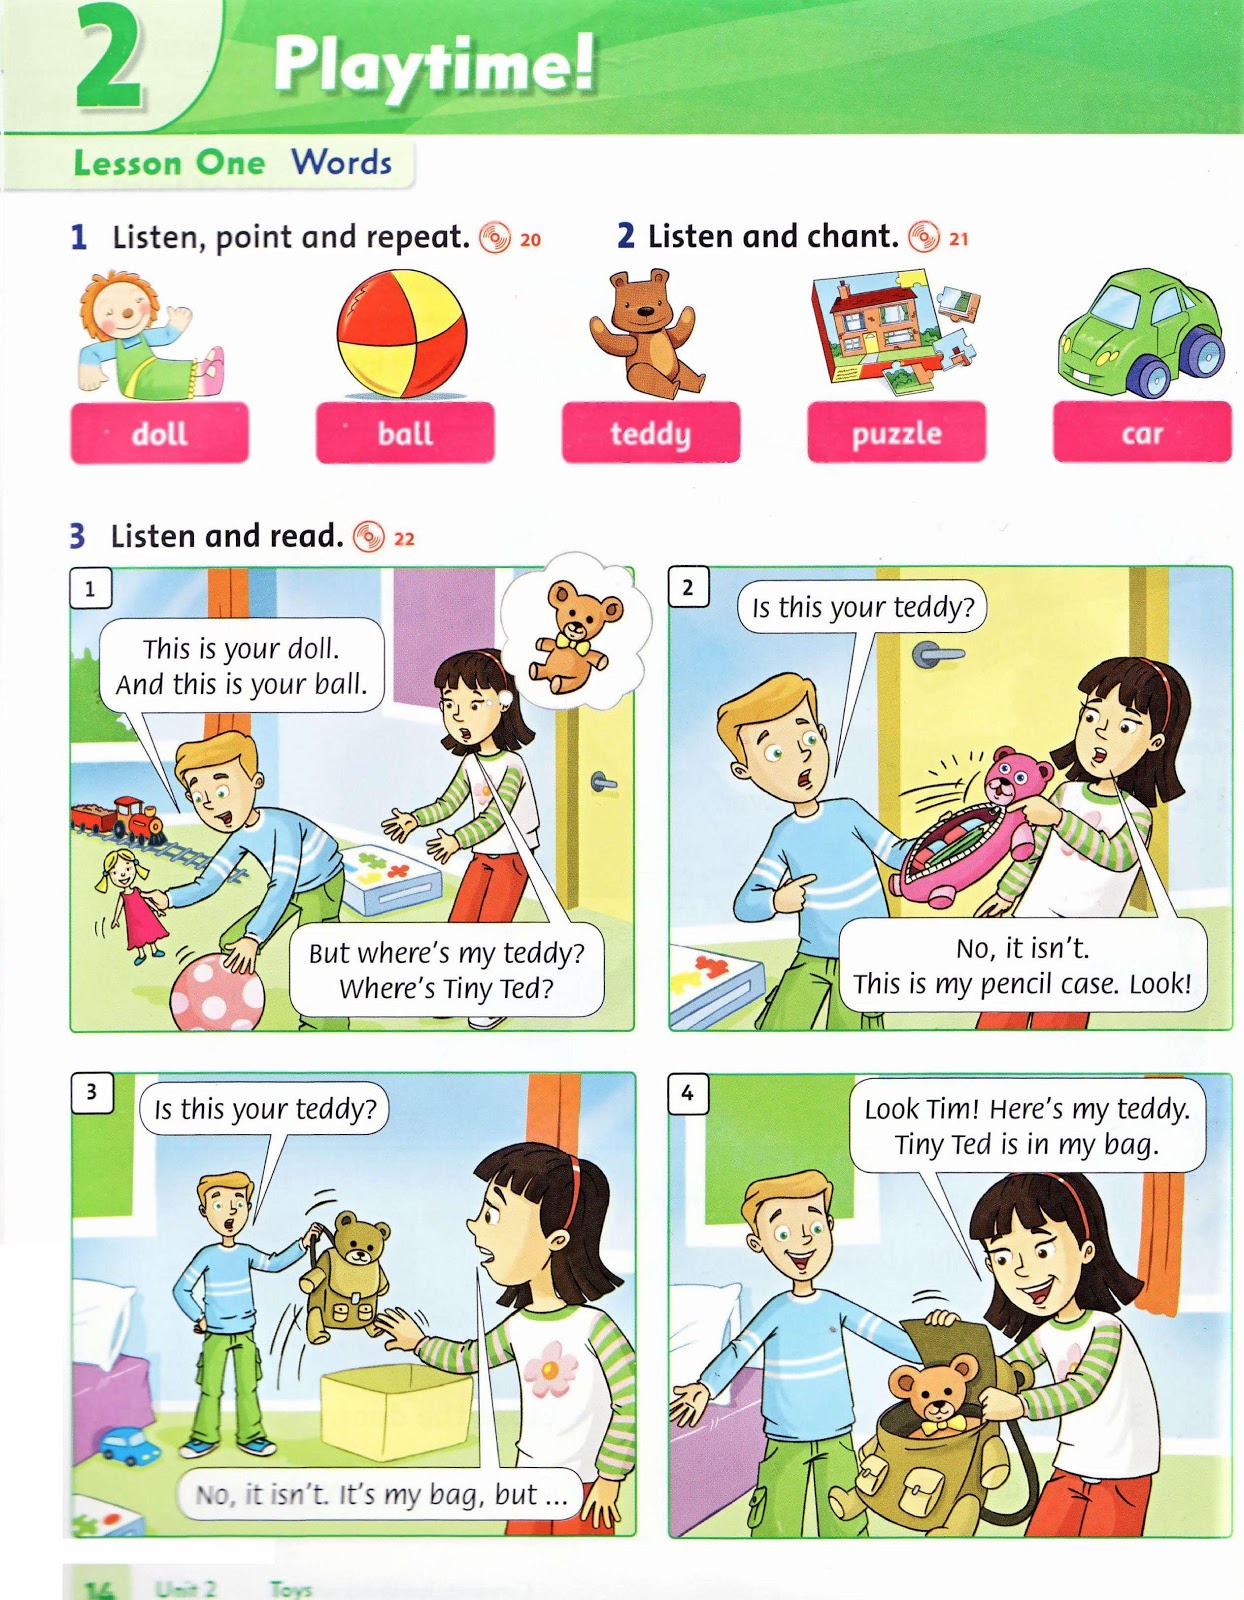 Английский язык starter. Family and friends 1 класс. Family and friends 1 class book. Family and friends 2 class book 1 урок. Ff1 английский Family and friends 1.